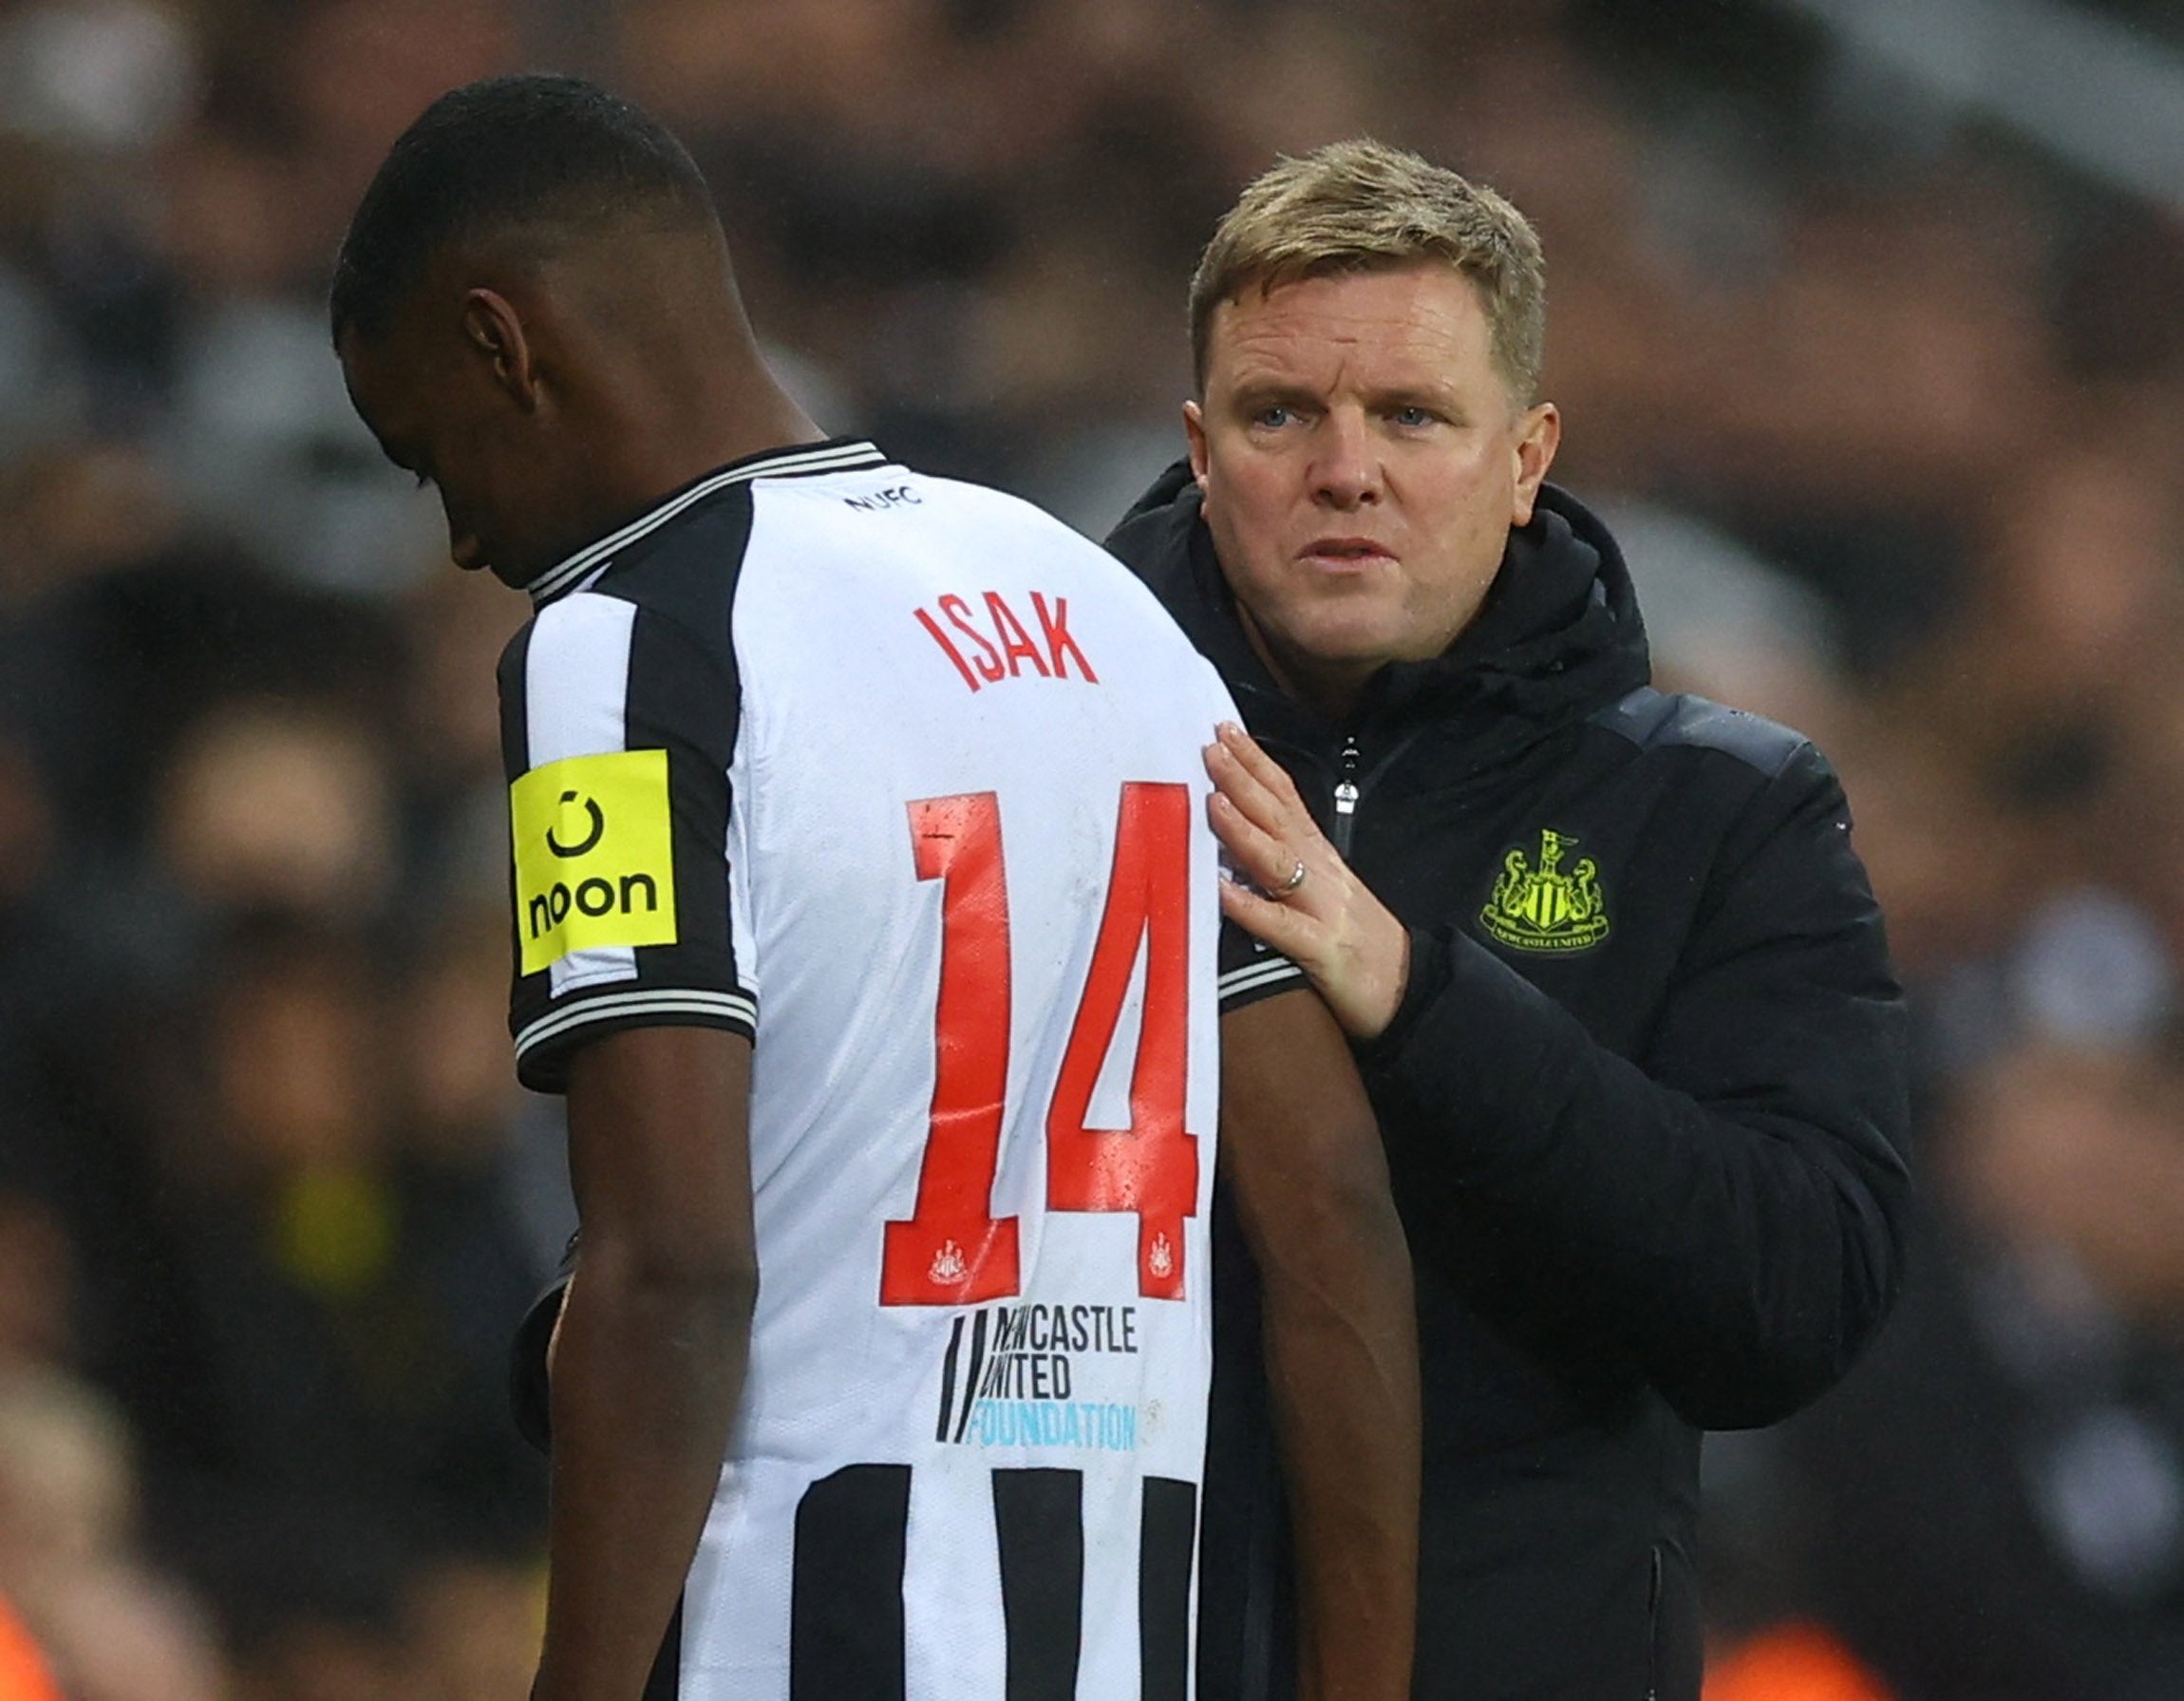 Newcastle are likely to be without Alexander Isak and Jacob Murphy the next time they take on Borussia Dortmund